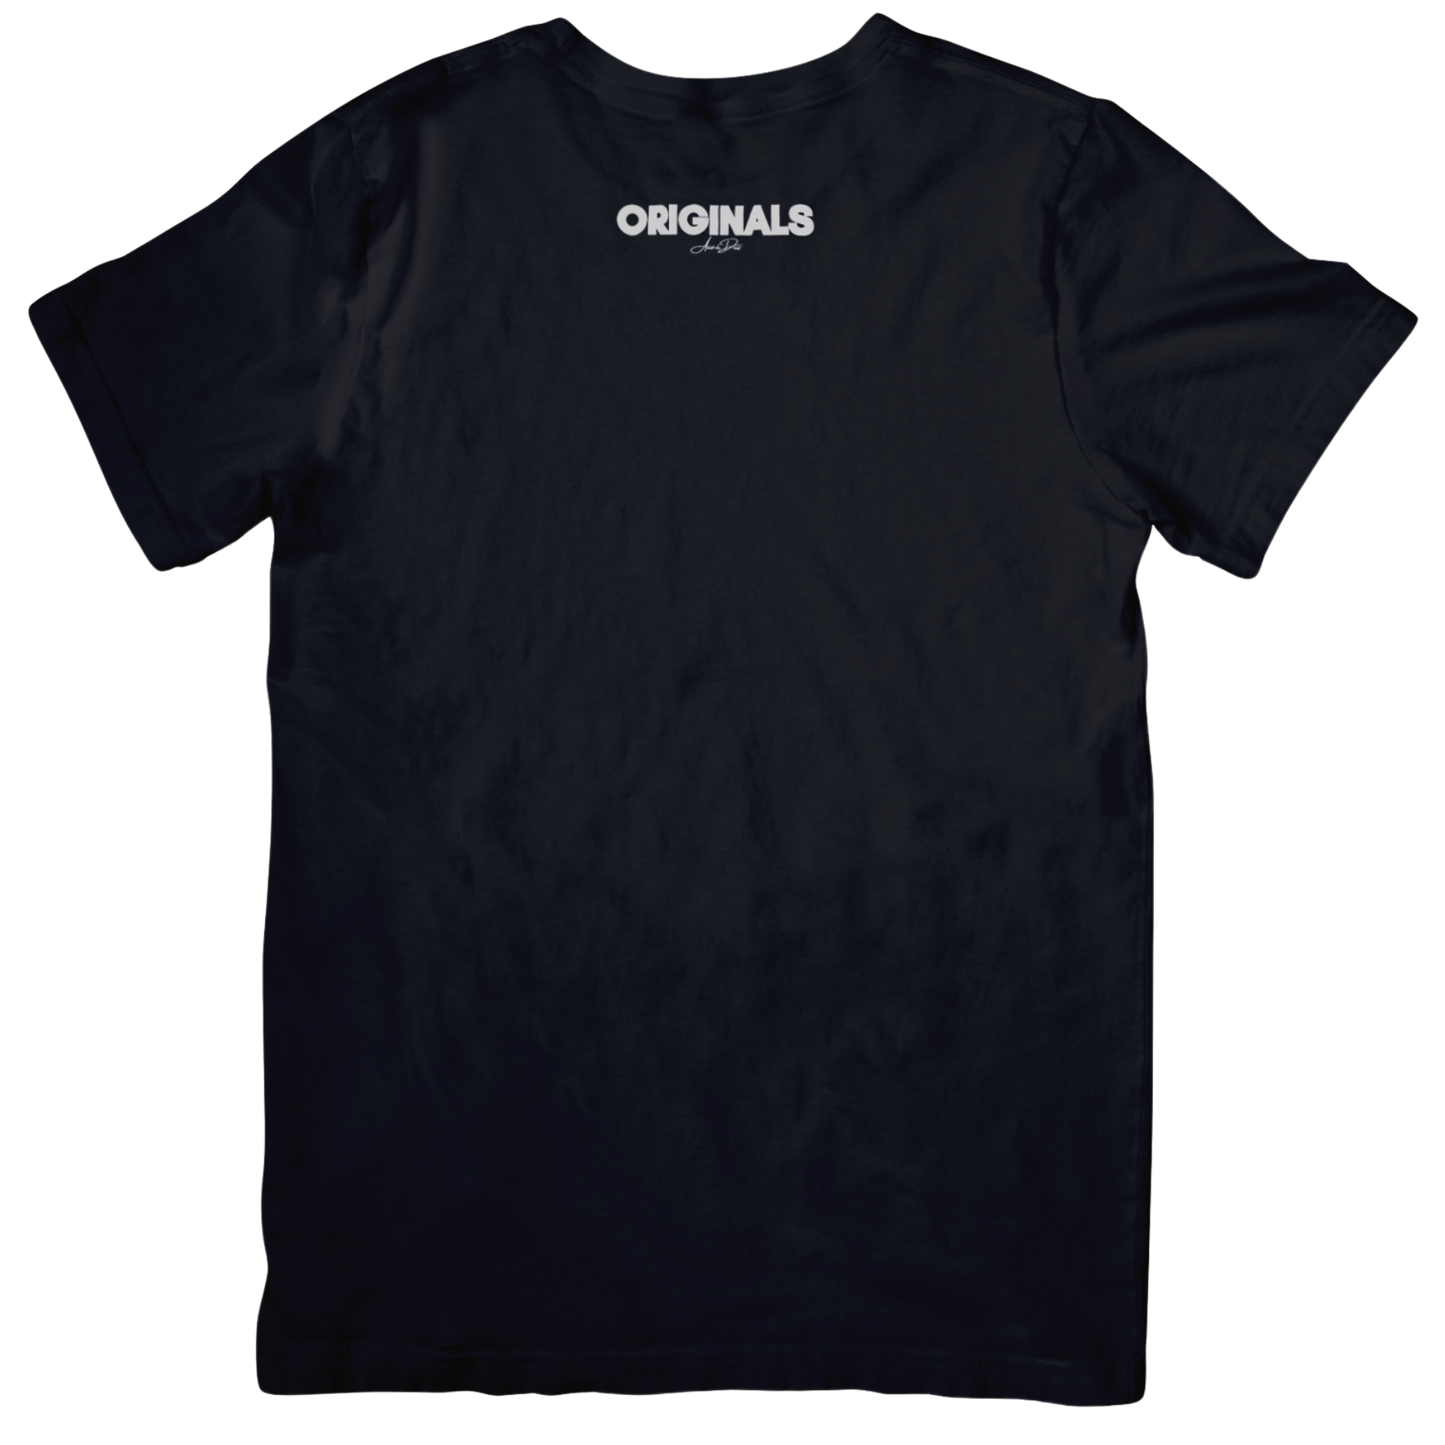 THE REAL INFLUENCER T-Shirt - BLACK